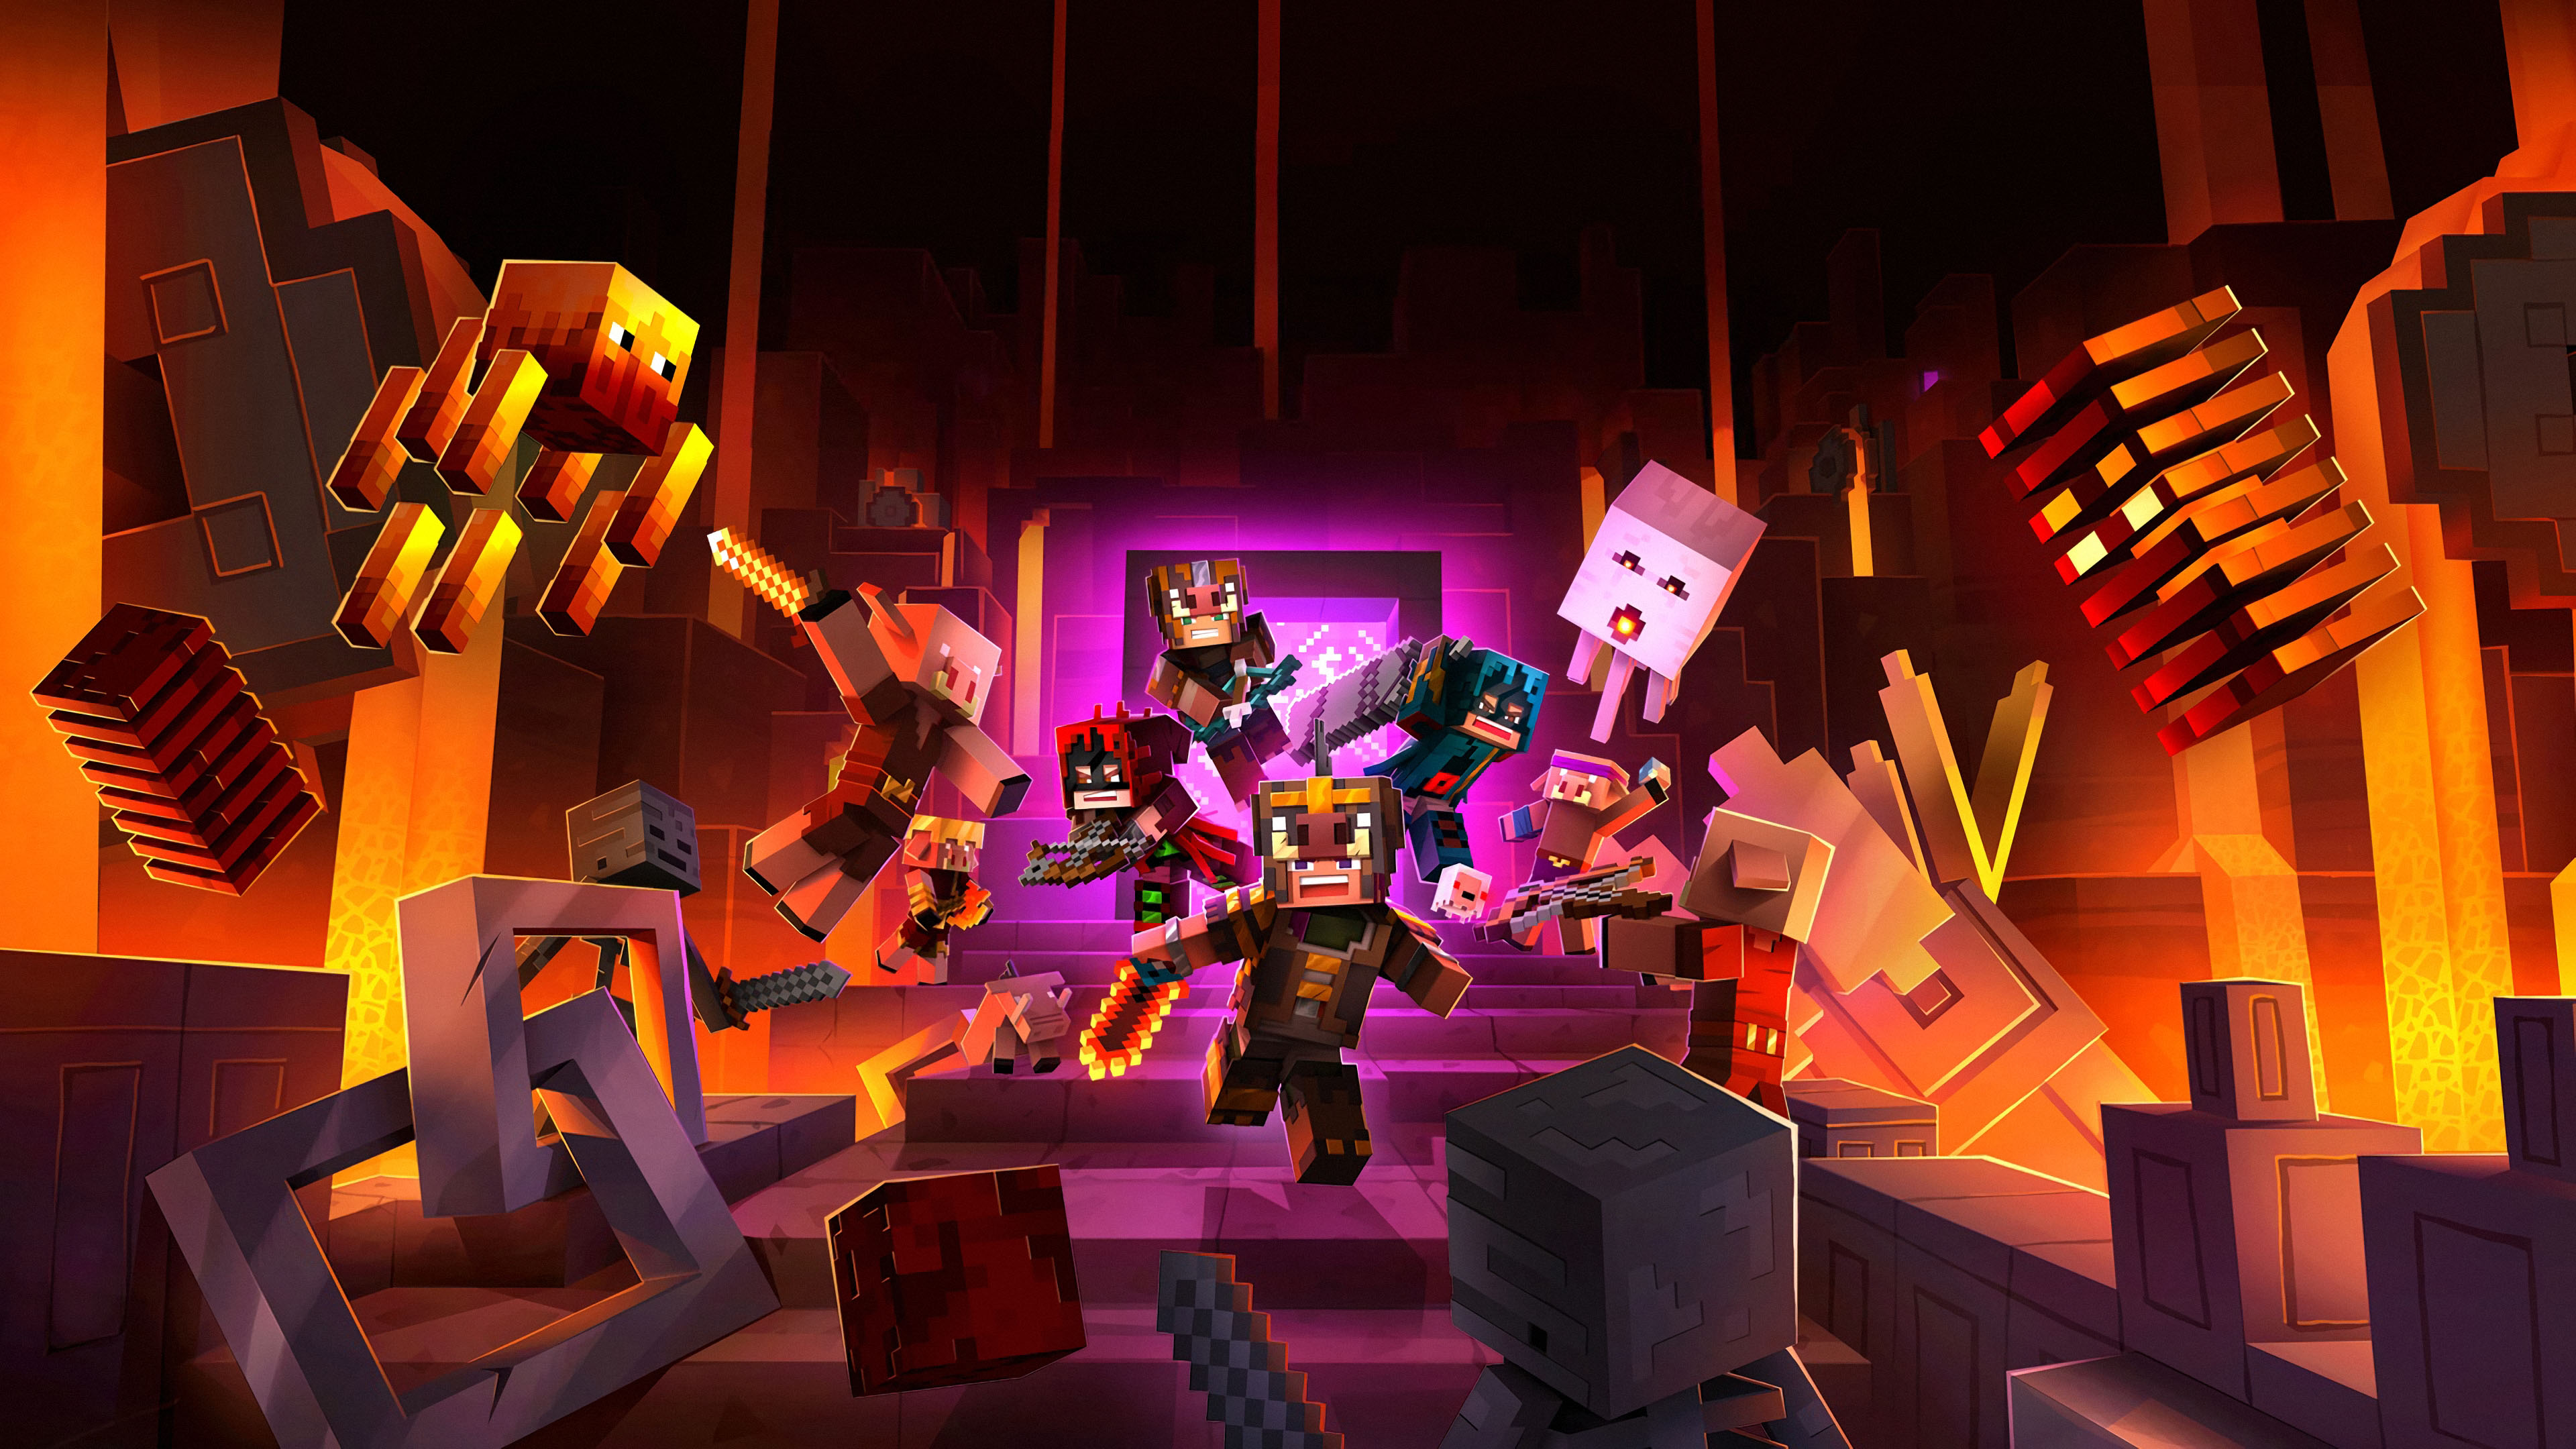 General 3840x2160 Minecraft Minecraft Dungeons Minecraft: Nether Blaze (Minecraft) Ghast (Minecraft) Magma Cube (Minecraft) Piglin (Minecraft) Hoglin (Minecraft) 4K video games Mojang video game characters